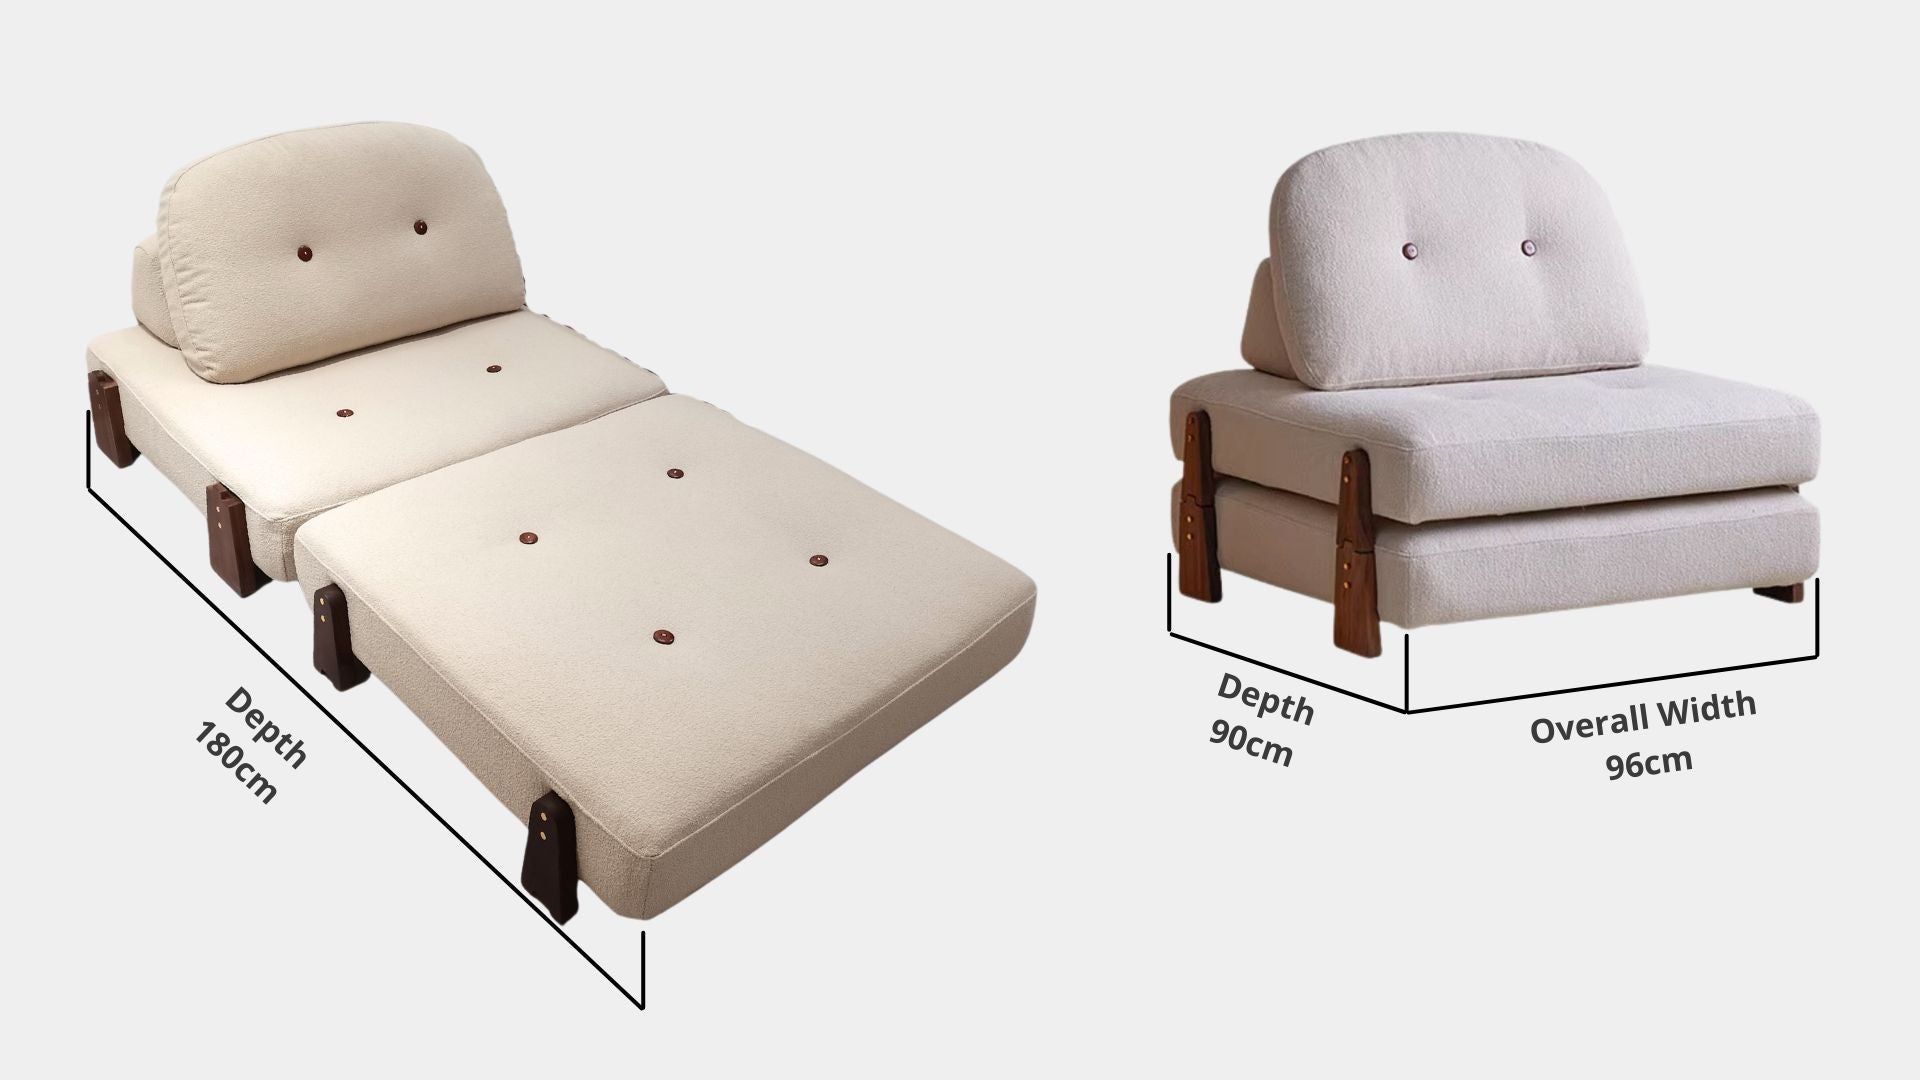 Details the key dimensions in terms of overall width, overall depth and seat width for Cakelet Fabric Sofa Bed